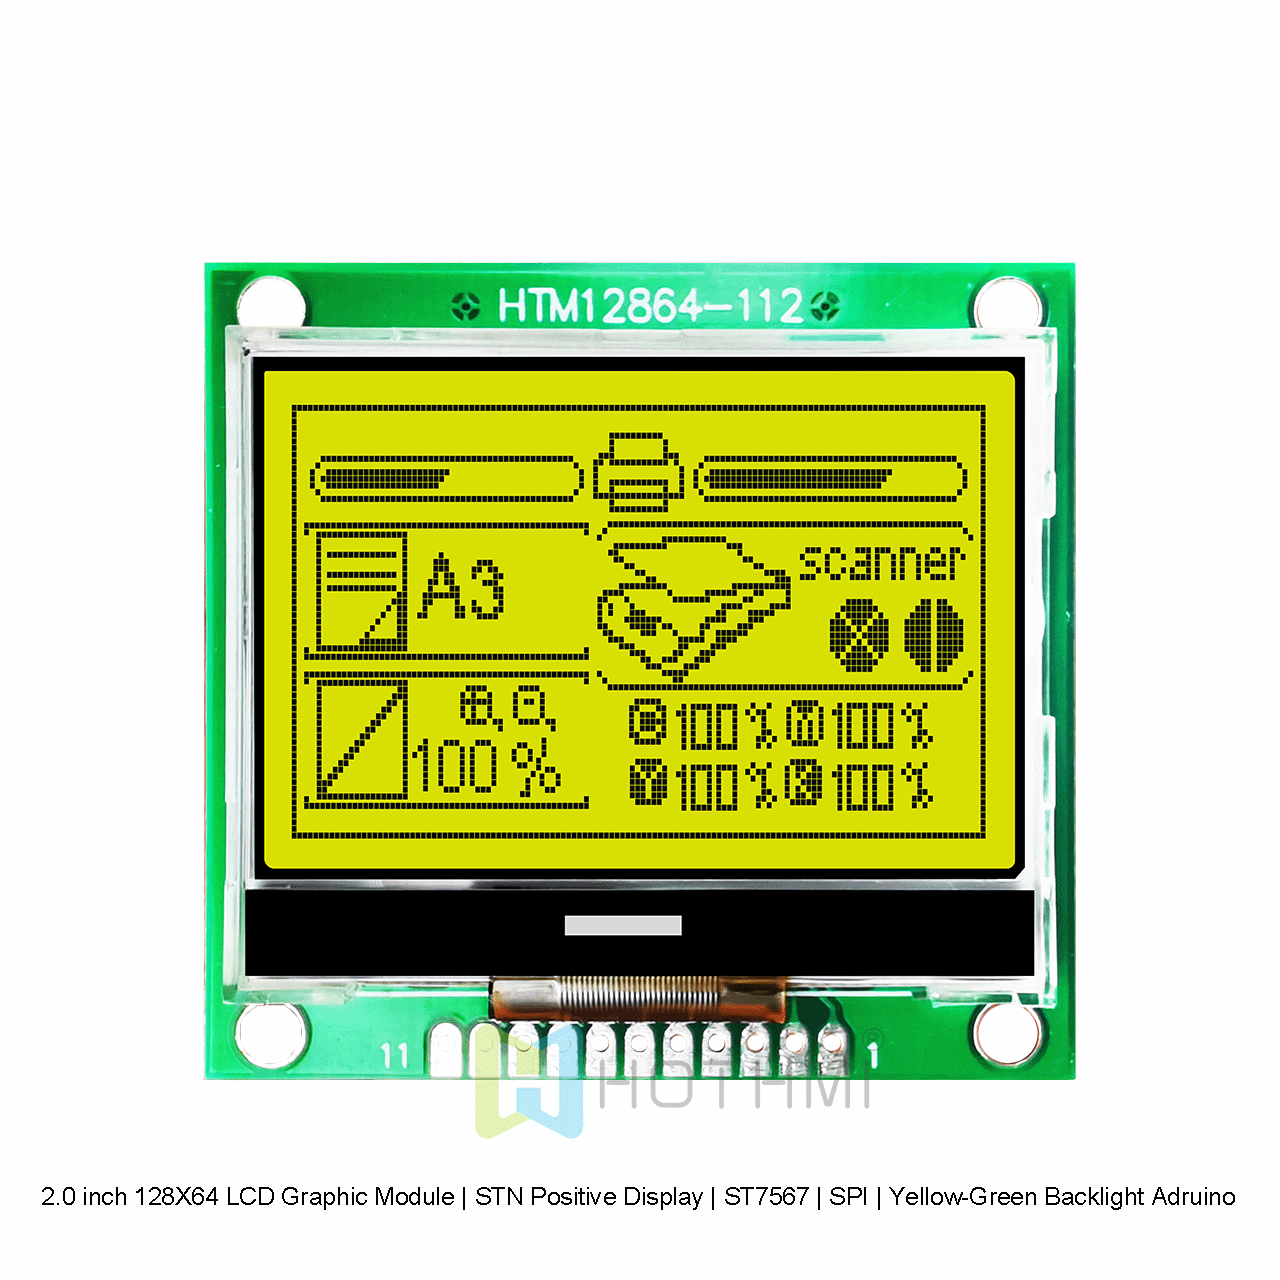 2.0 inch 128X64 LCD Graphic Module | STN Positive Display | ST7567 | SPI | Yellow-Green Backlight Adruino